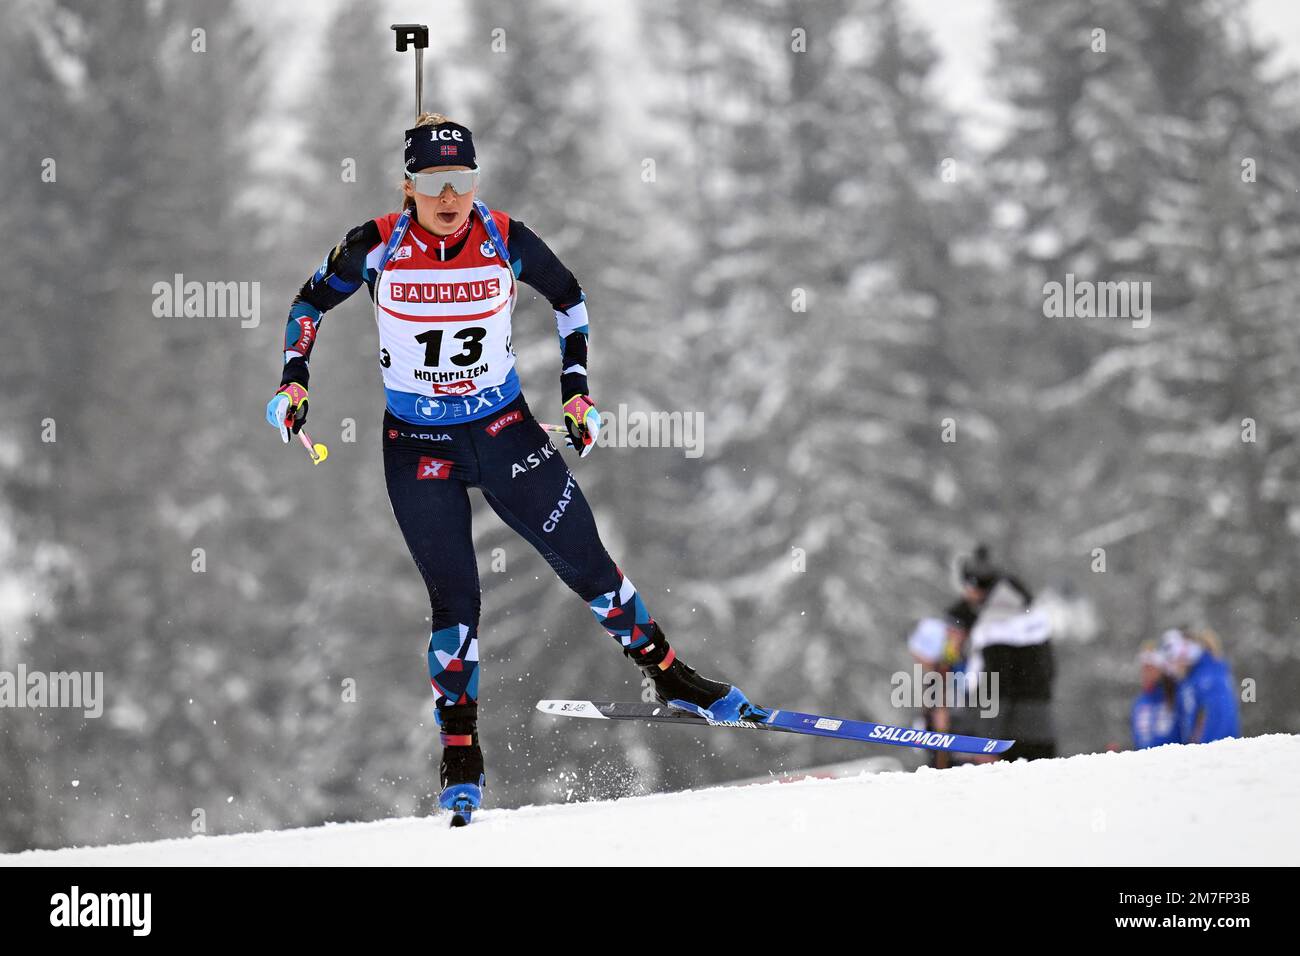 Ingrid Landmark Tandrevold of Norway competes during the womens 10km pursuit race at the Biathlon World Cup in Hochfilzen, Austria, Saturday, Dec